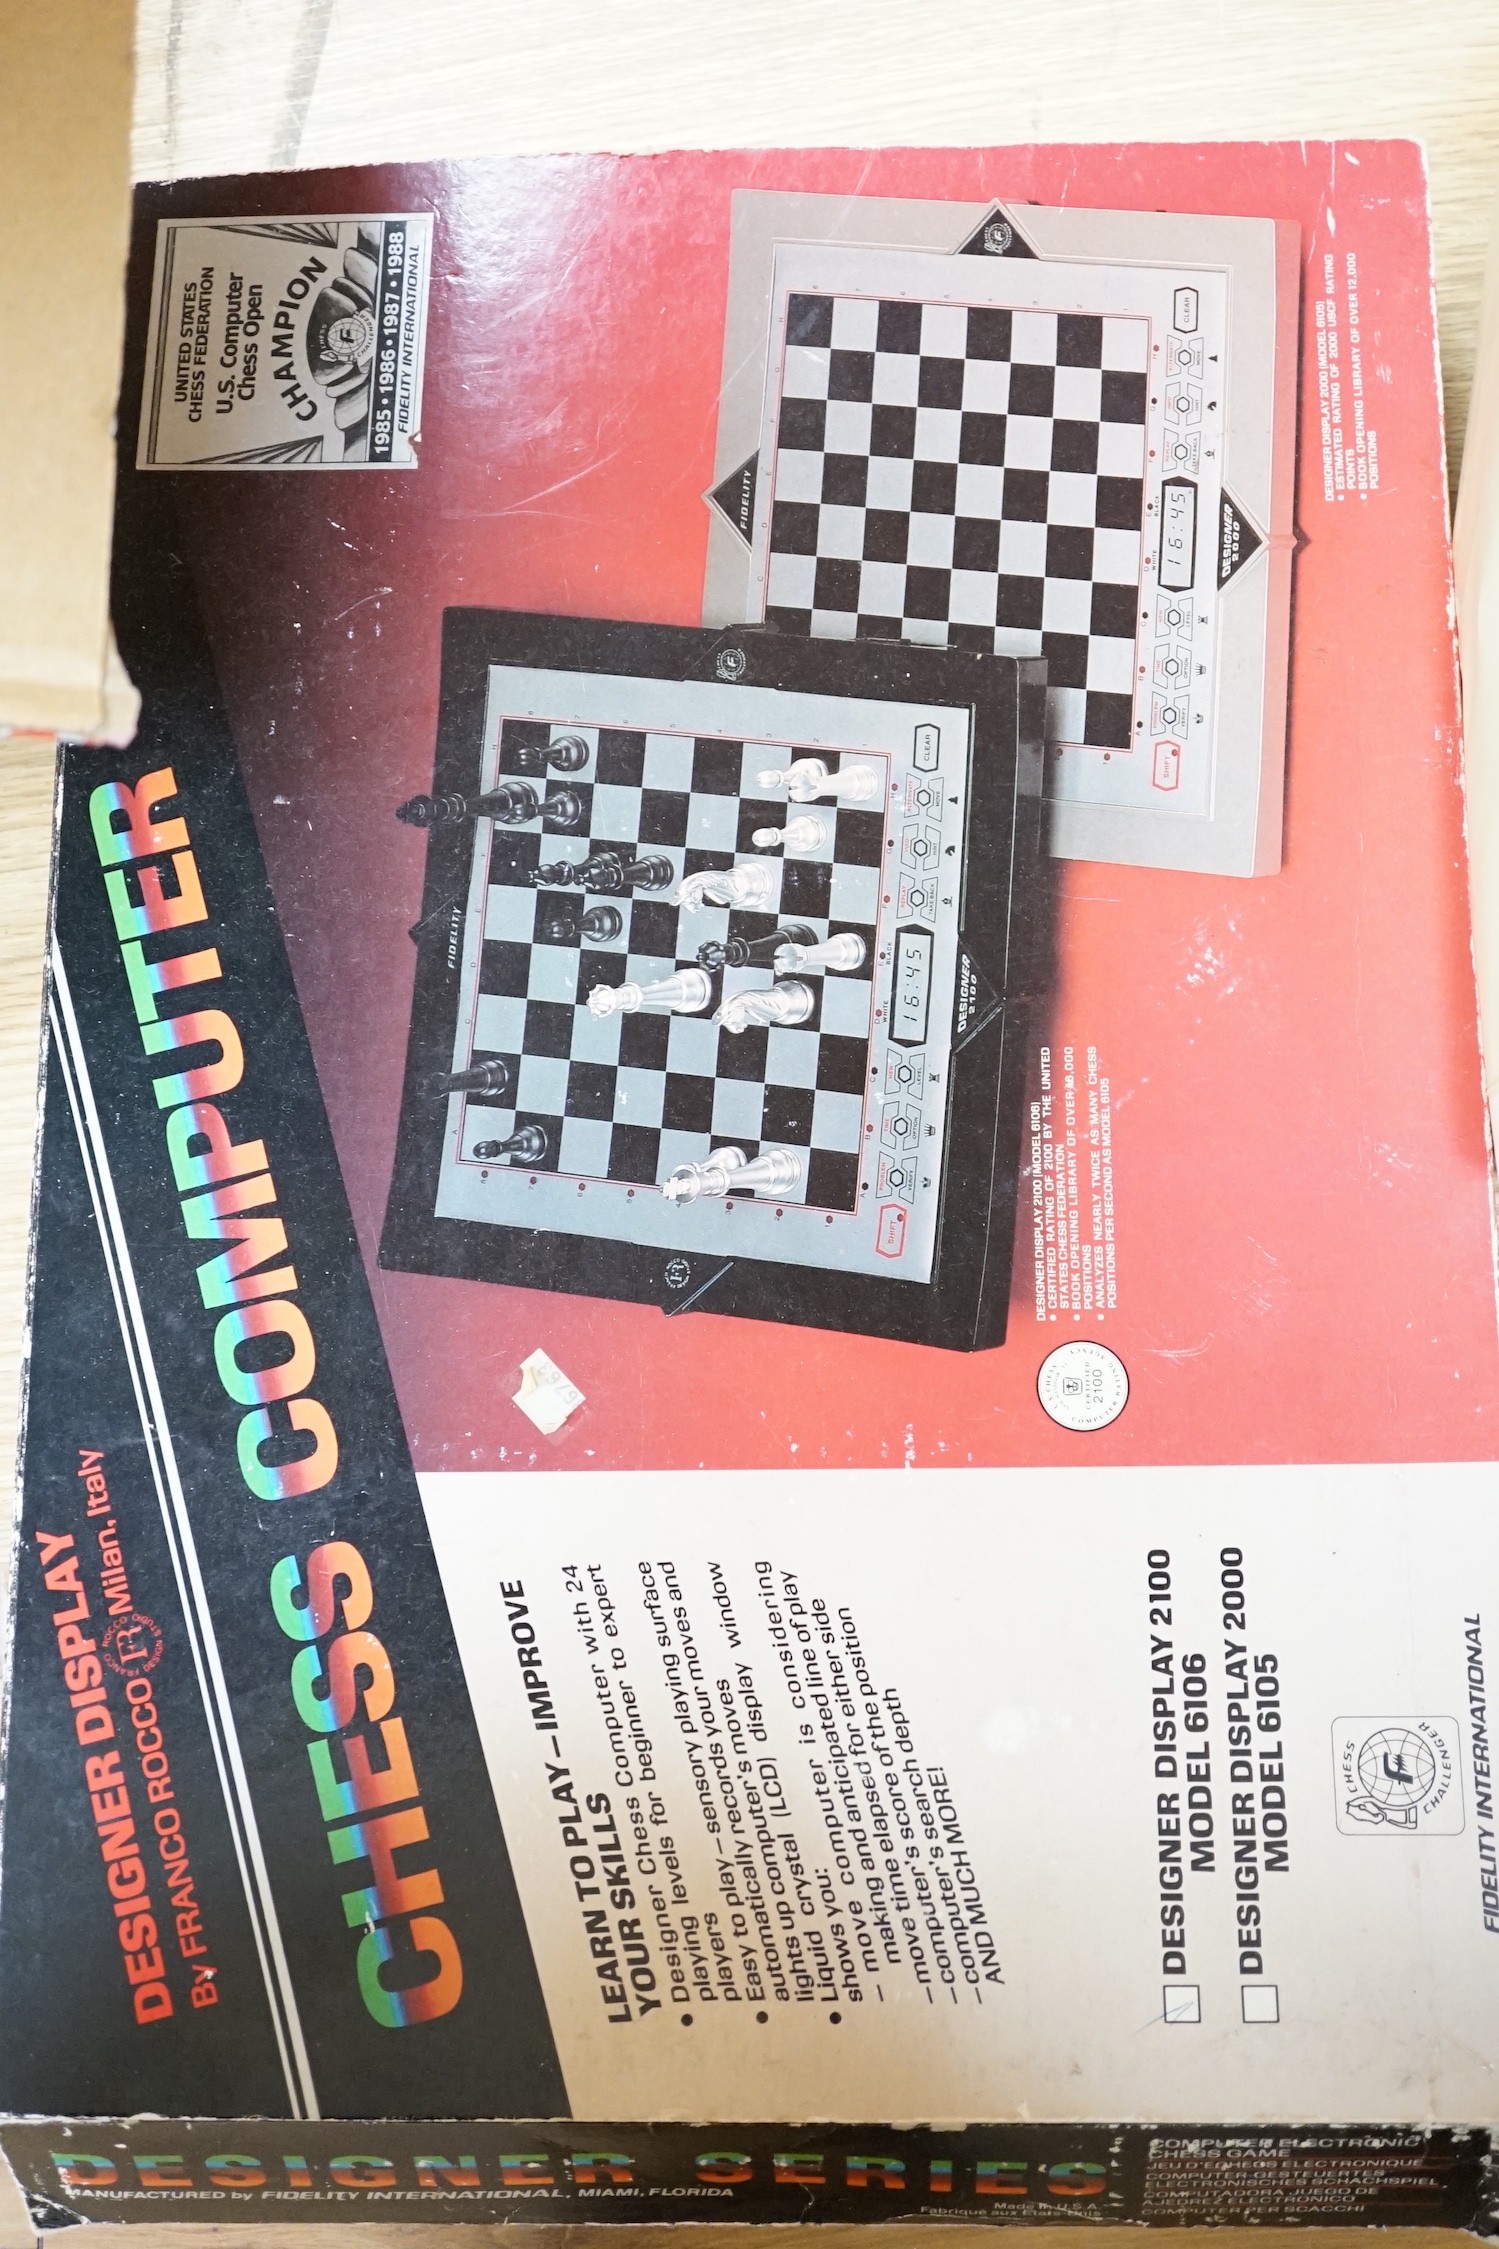 A Fidelity Electronic Chess Computer designer display 2100, model 6106, designed by Franco Rocco